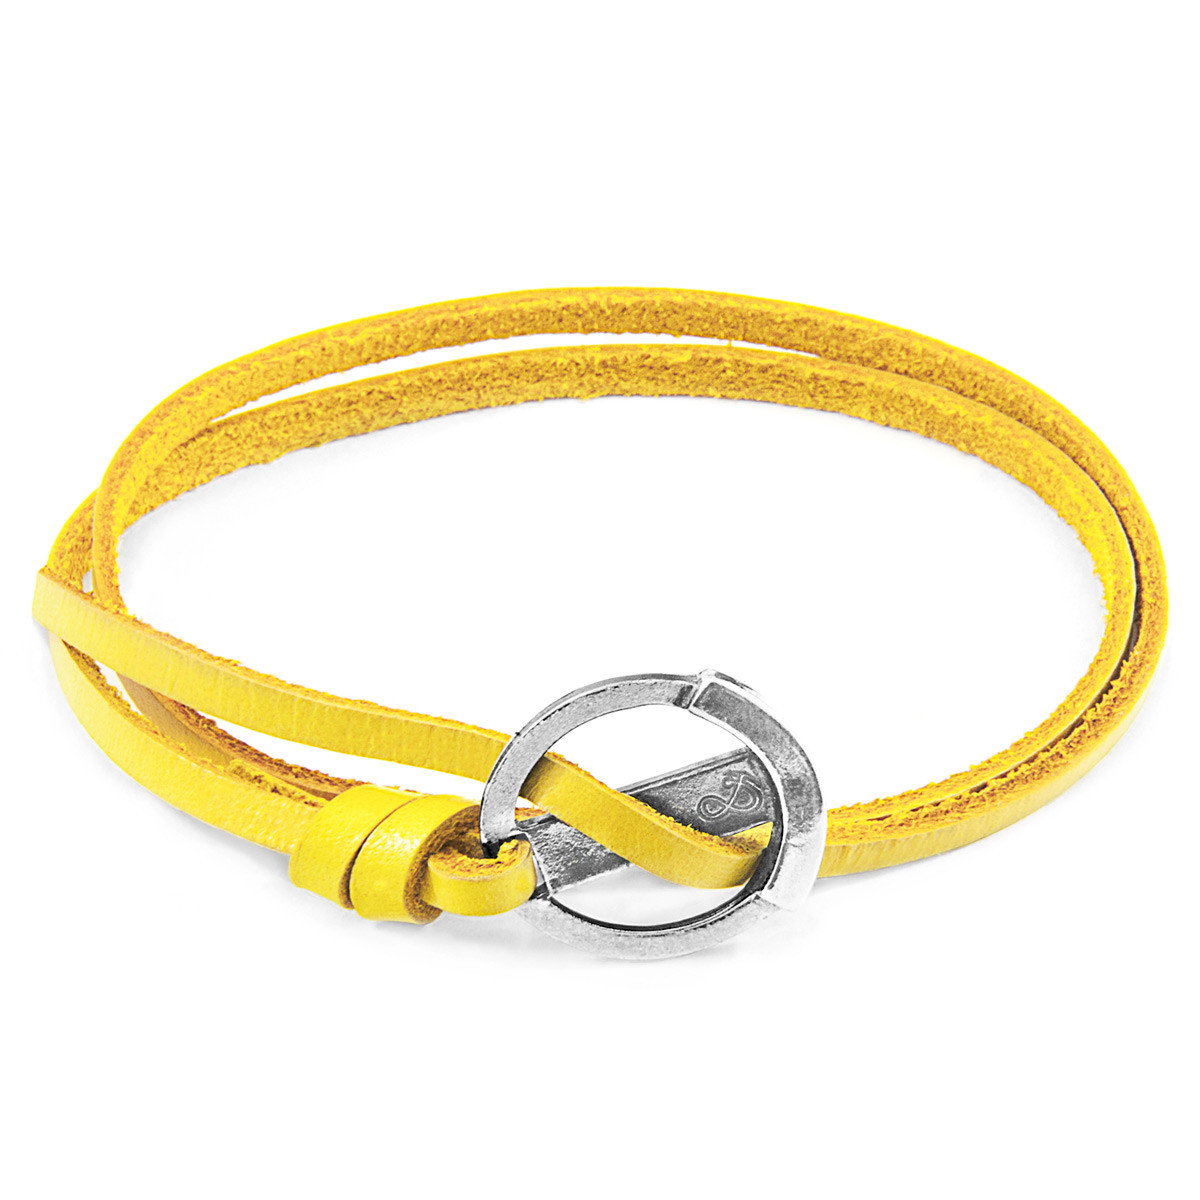 Anchor & Crew Mustard Yellow Ketch Anchor Silver and Flat Leather Bracelet